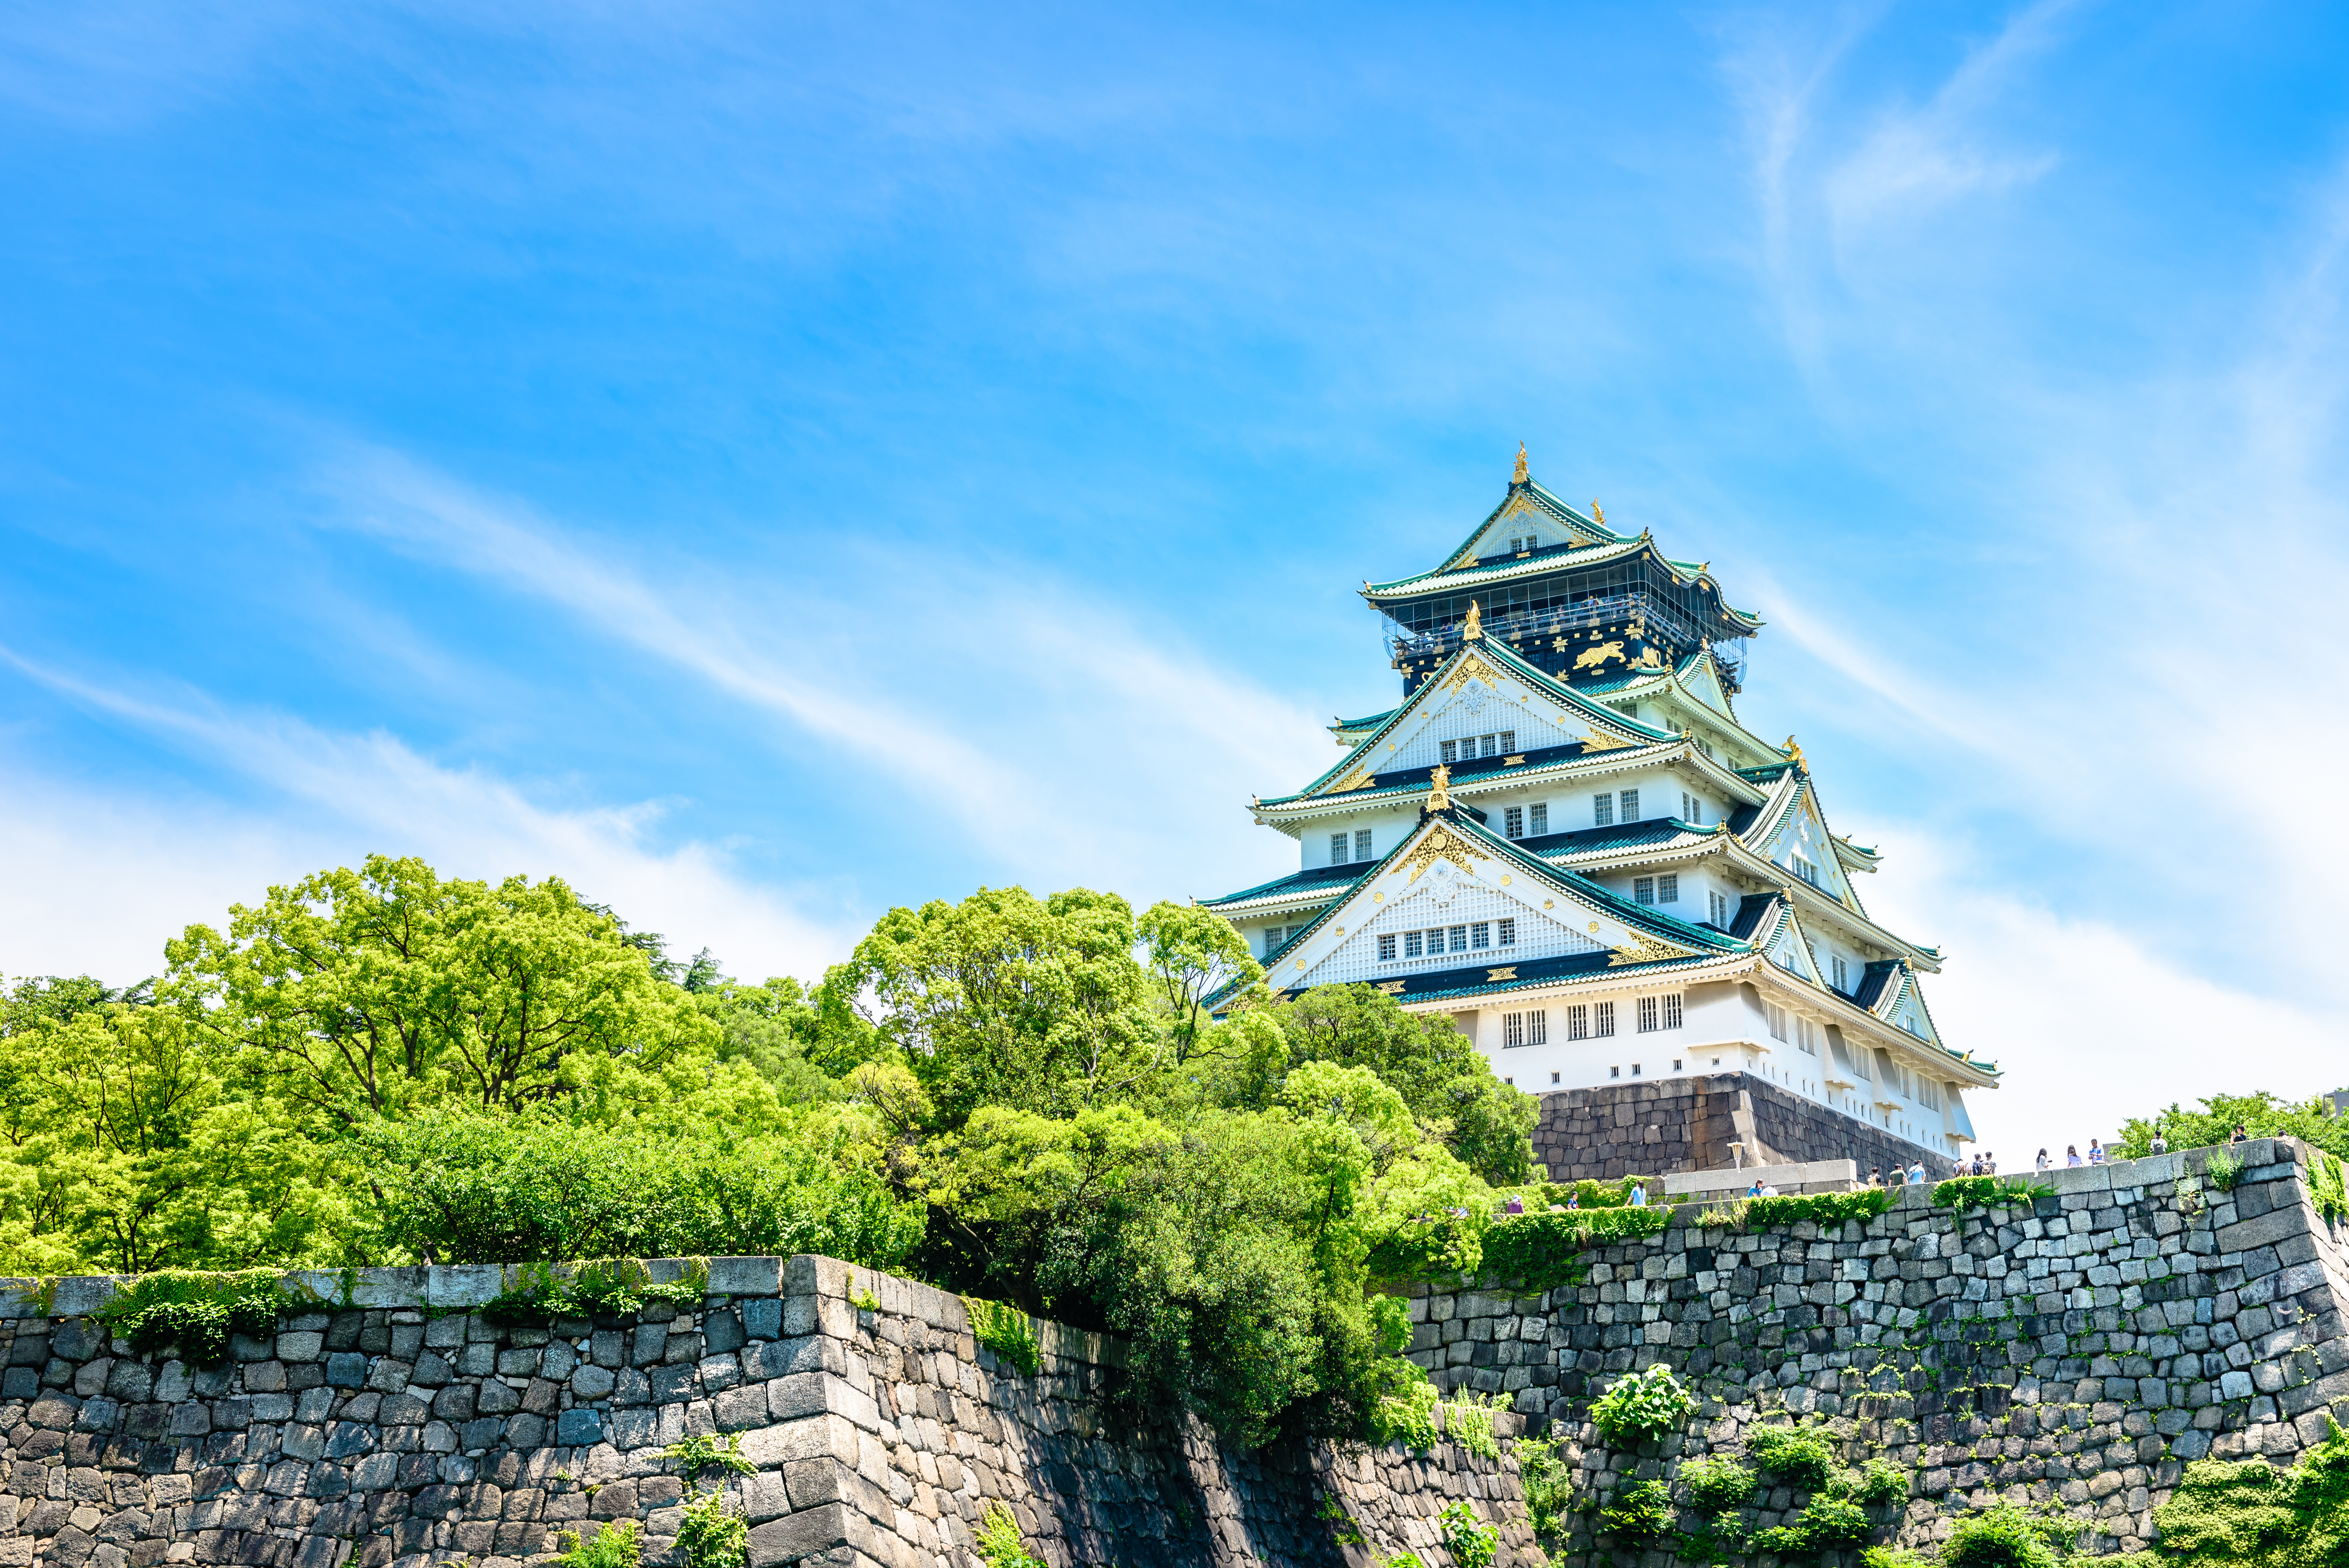 Greater Bay Airlines adds Osaka as fifth destination and enhances Seoul service in April 2023